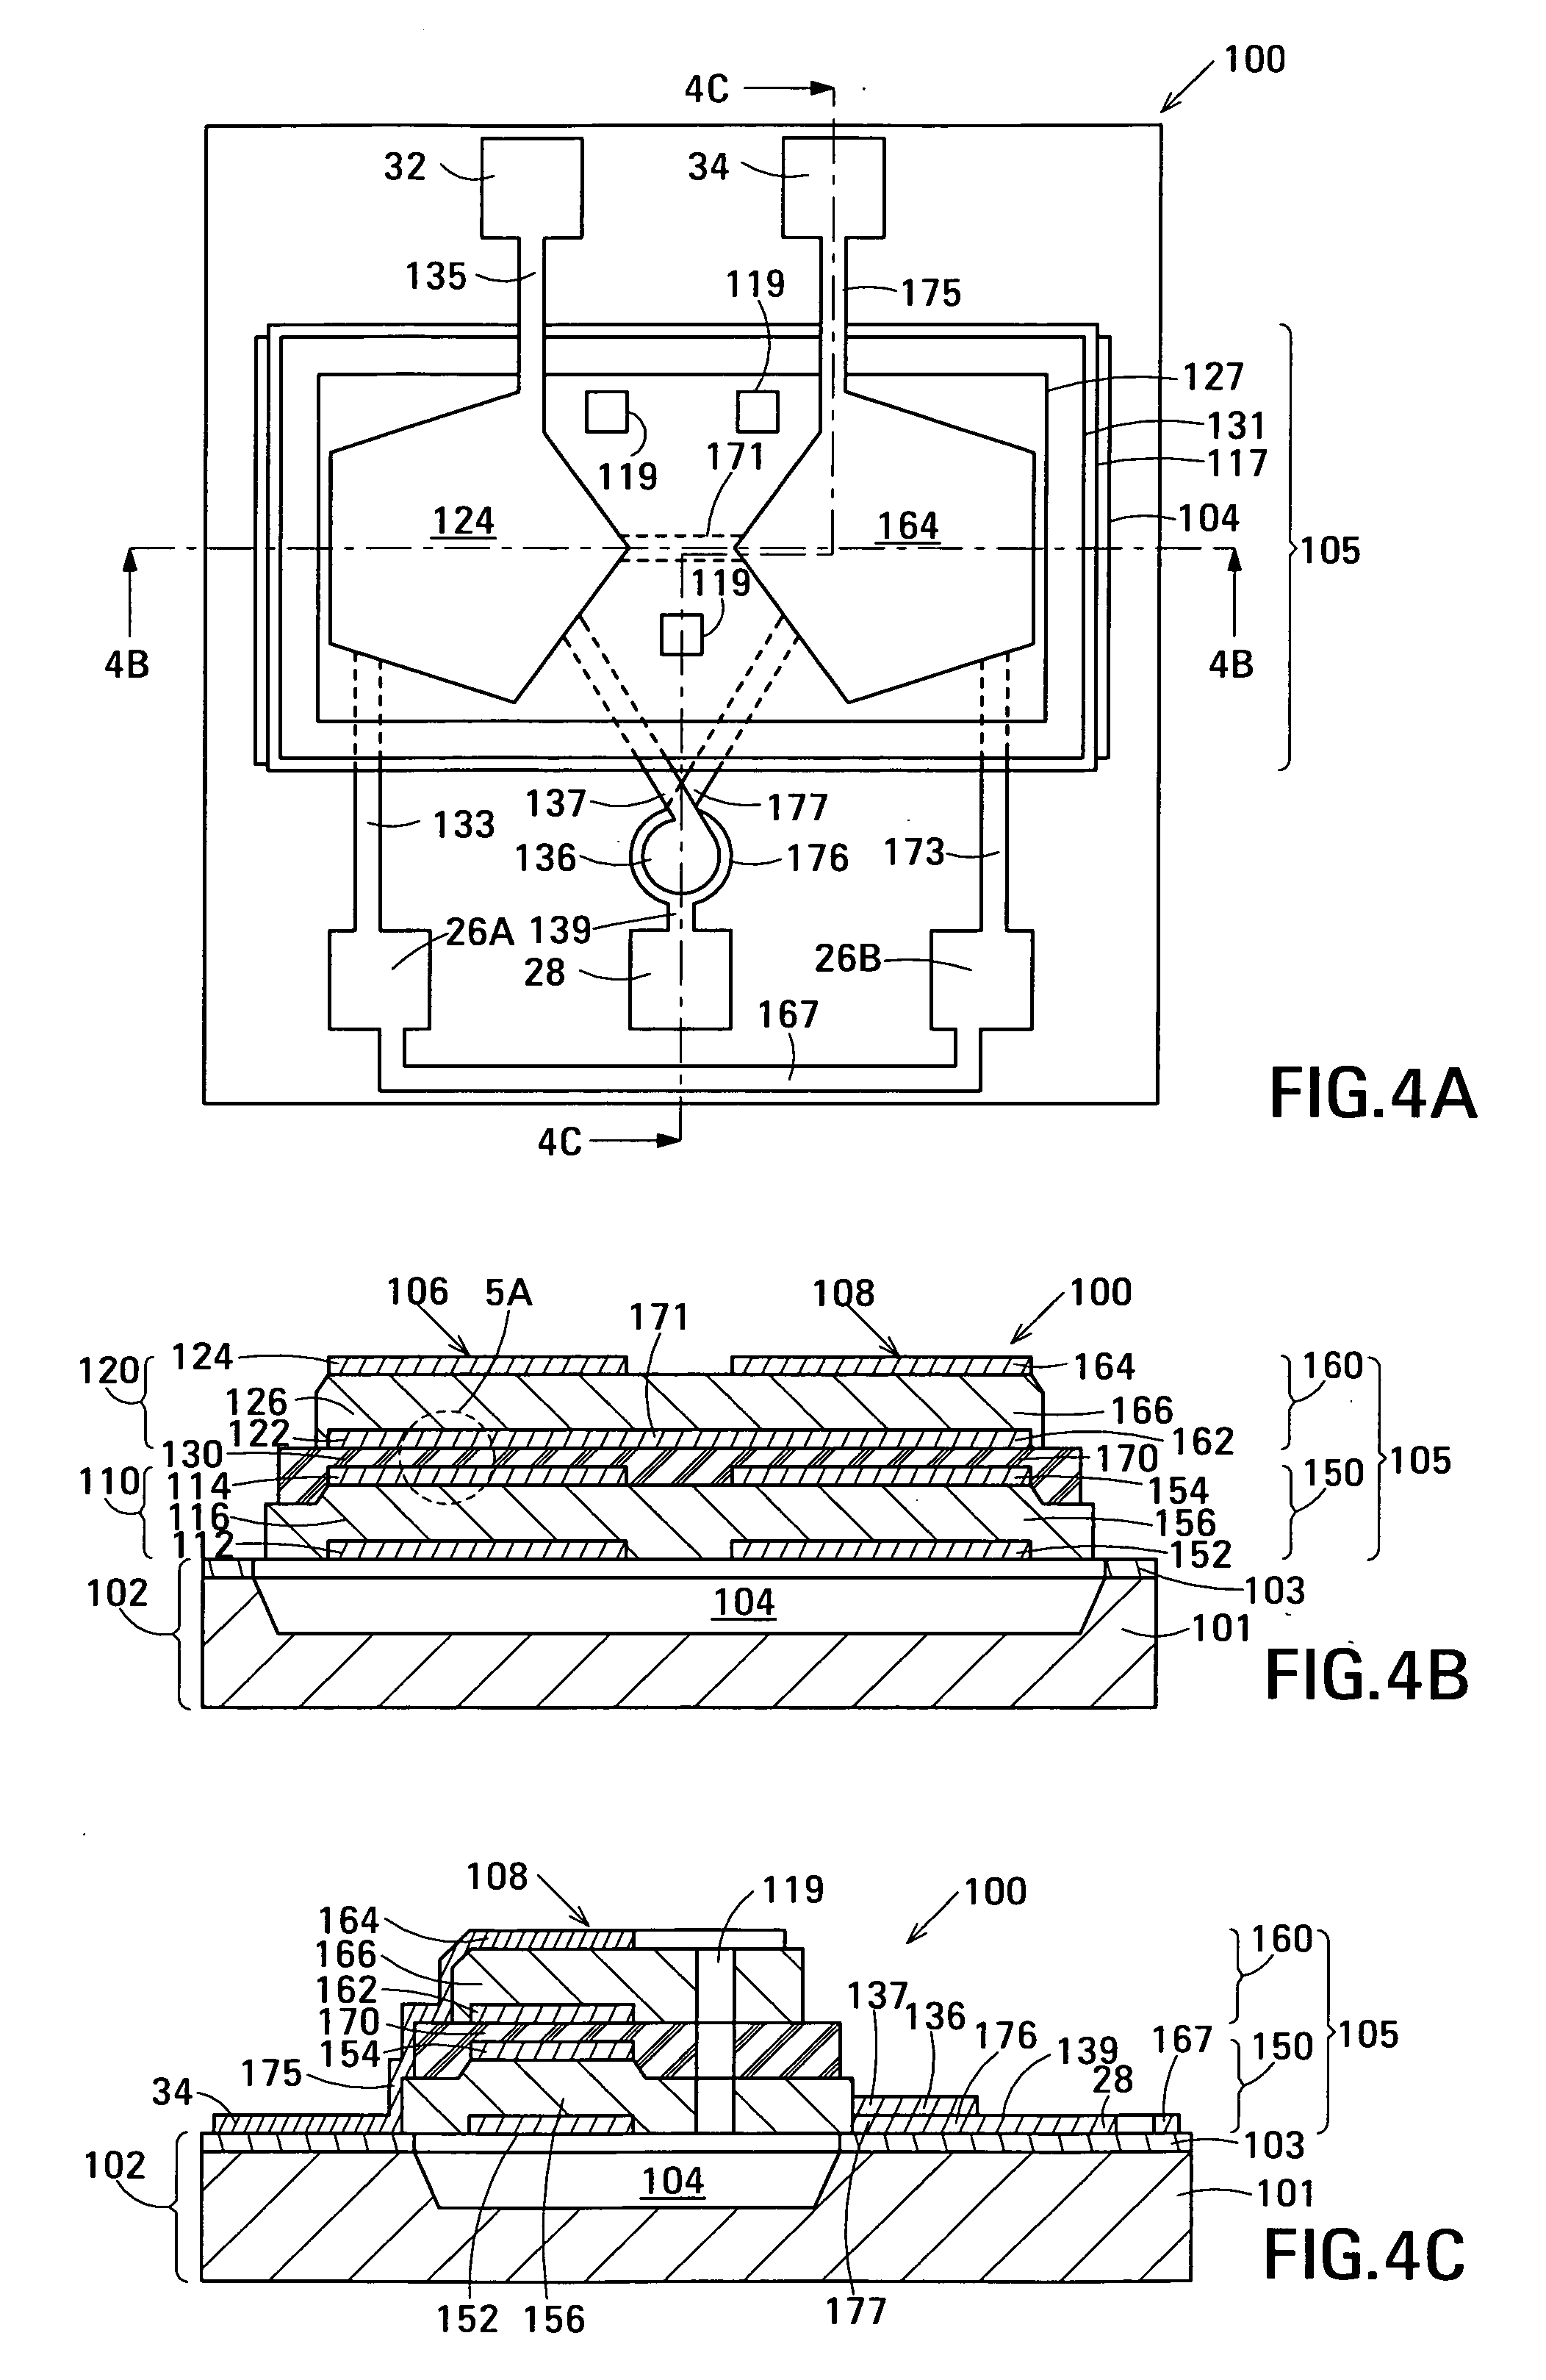 Acoustic galvanic isolator incorporating film acoustically-coupled transformer